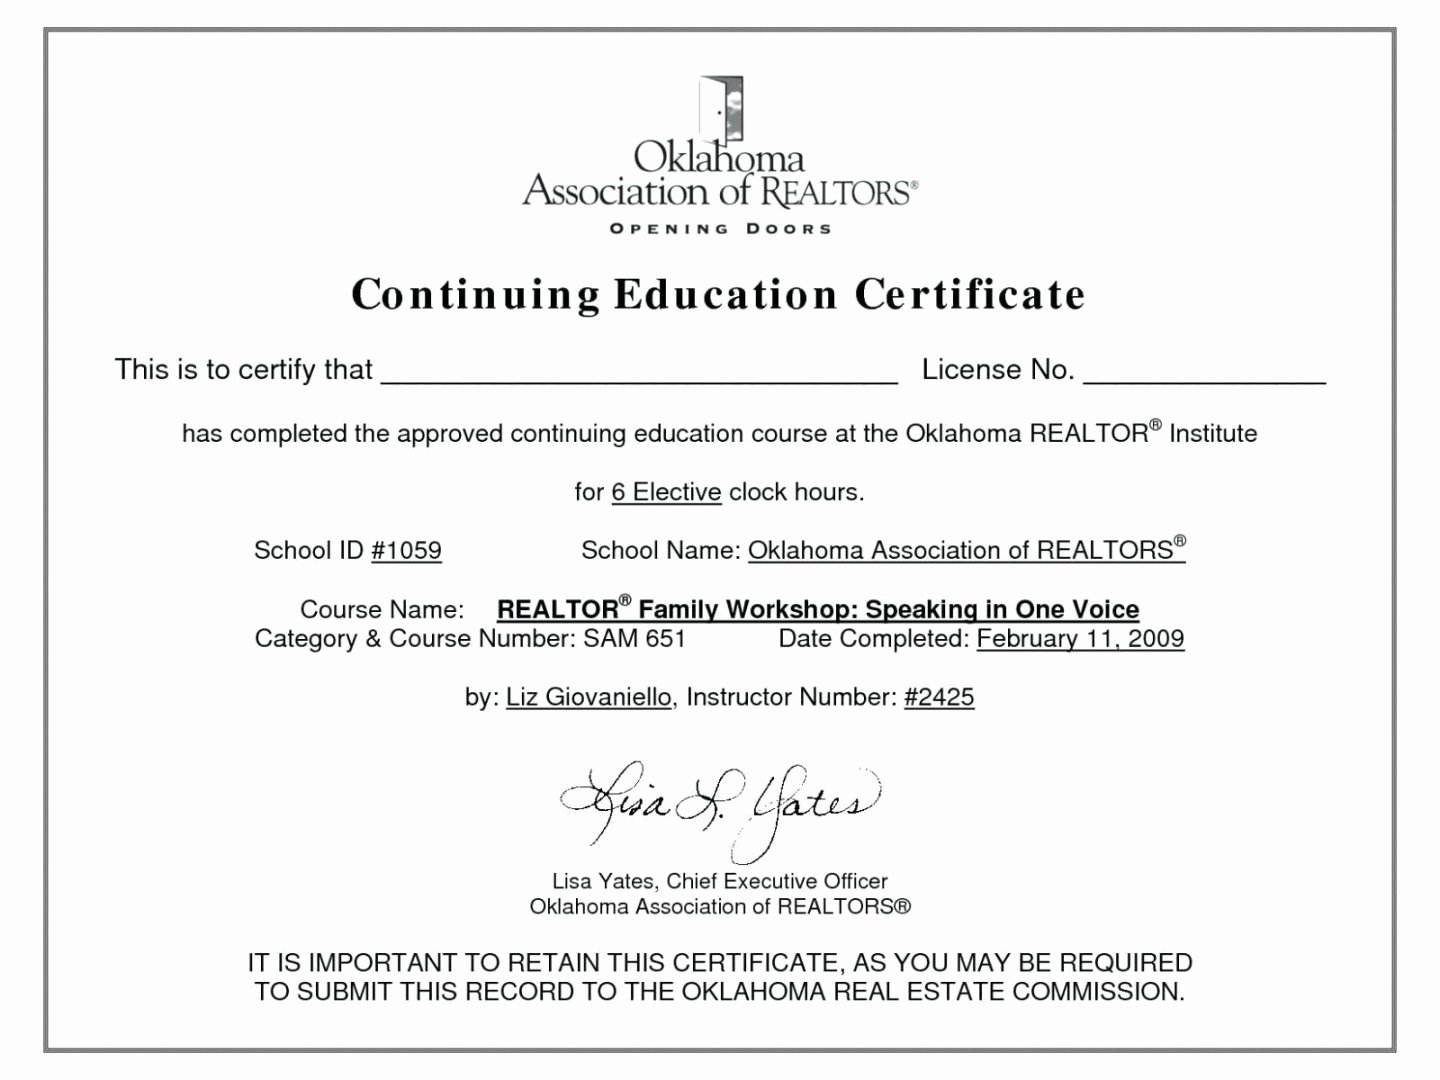 Continuing Education Credit Certificate Template Best Of Continuing Education Certificate Template